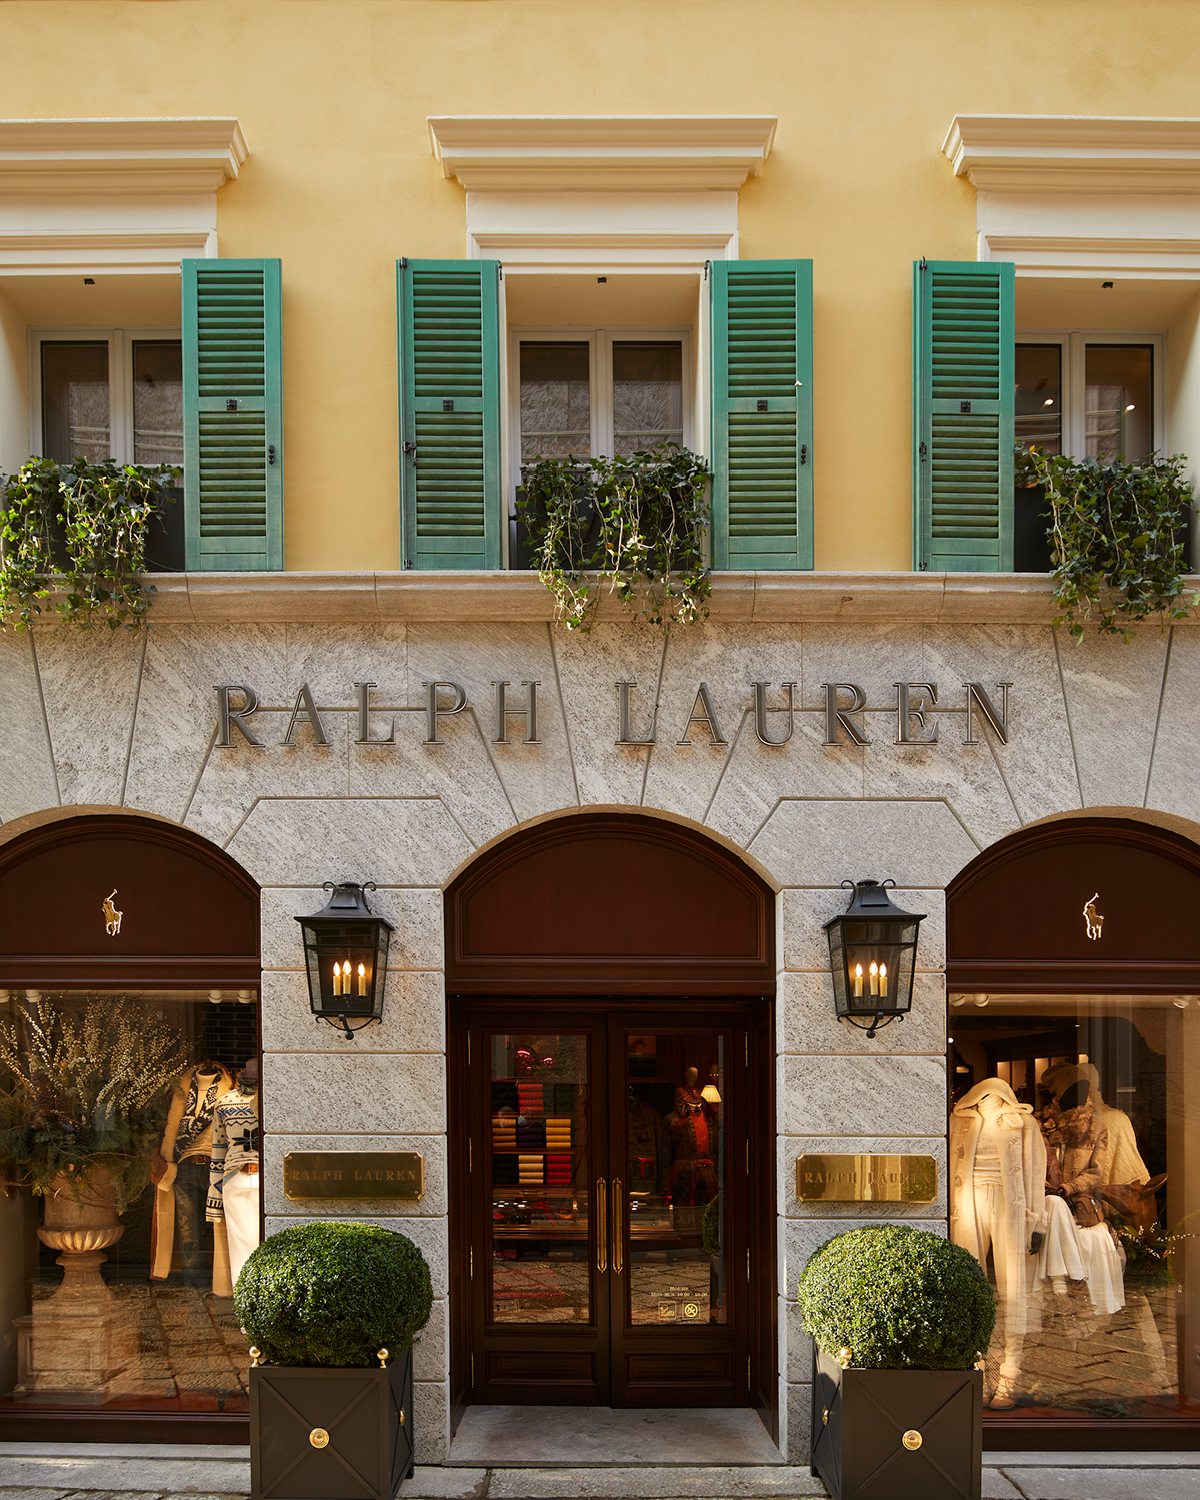 Where to go in Milan: The Bar at Ralph Lauren. Their 5 layer